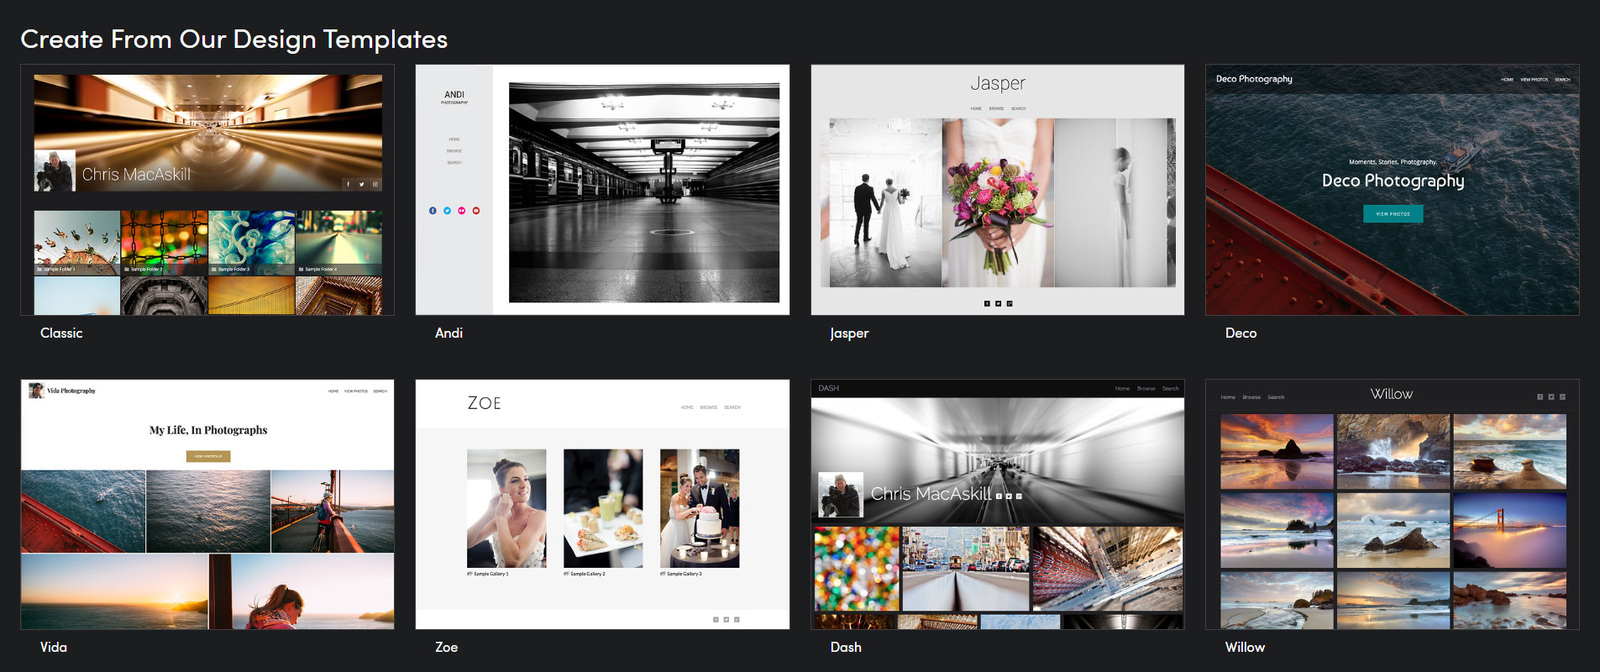 Image of photography website designs included with SmugMug.